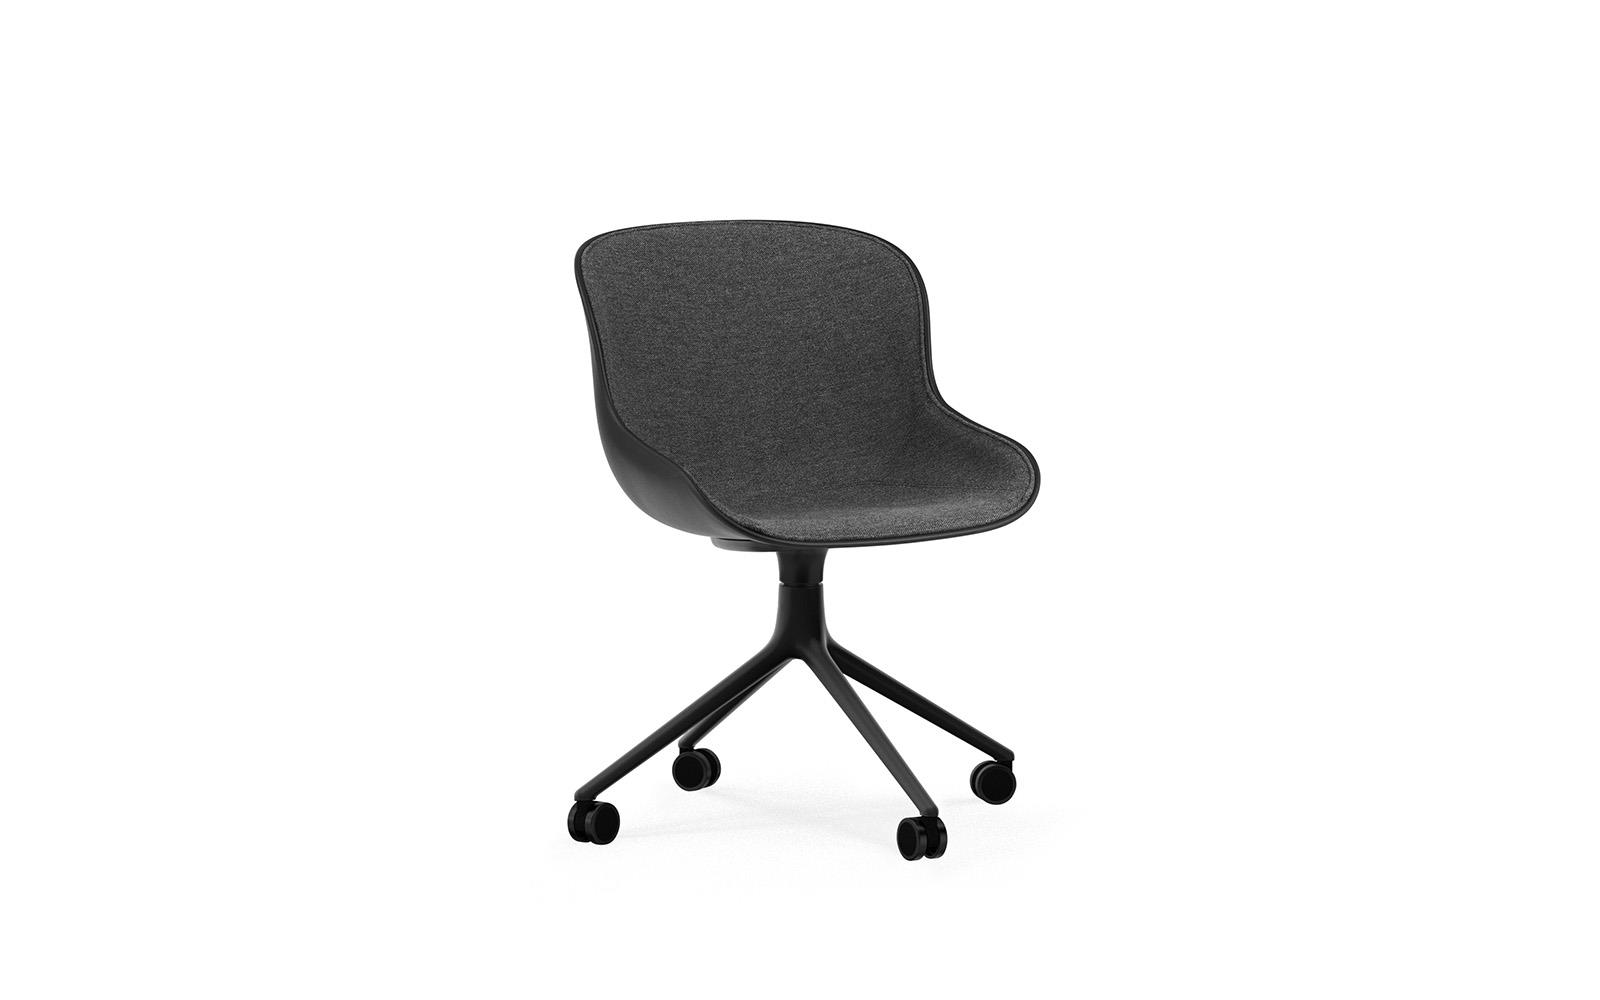 Hyg Chair Swivel 4W Front Upholstery